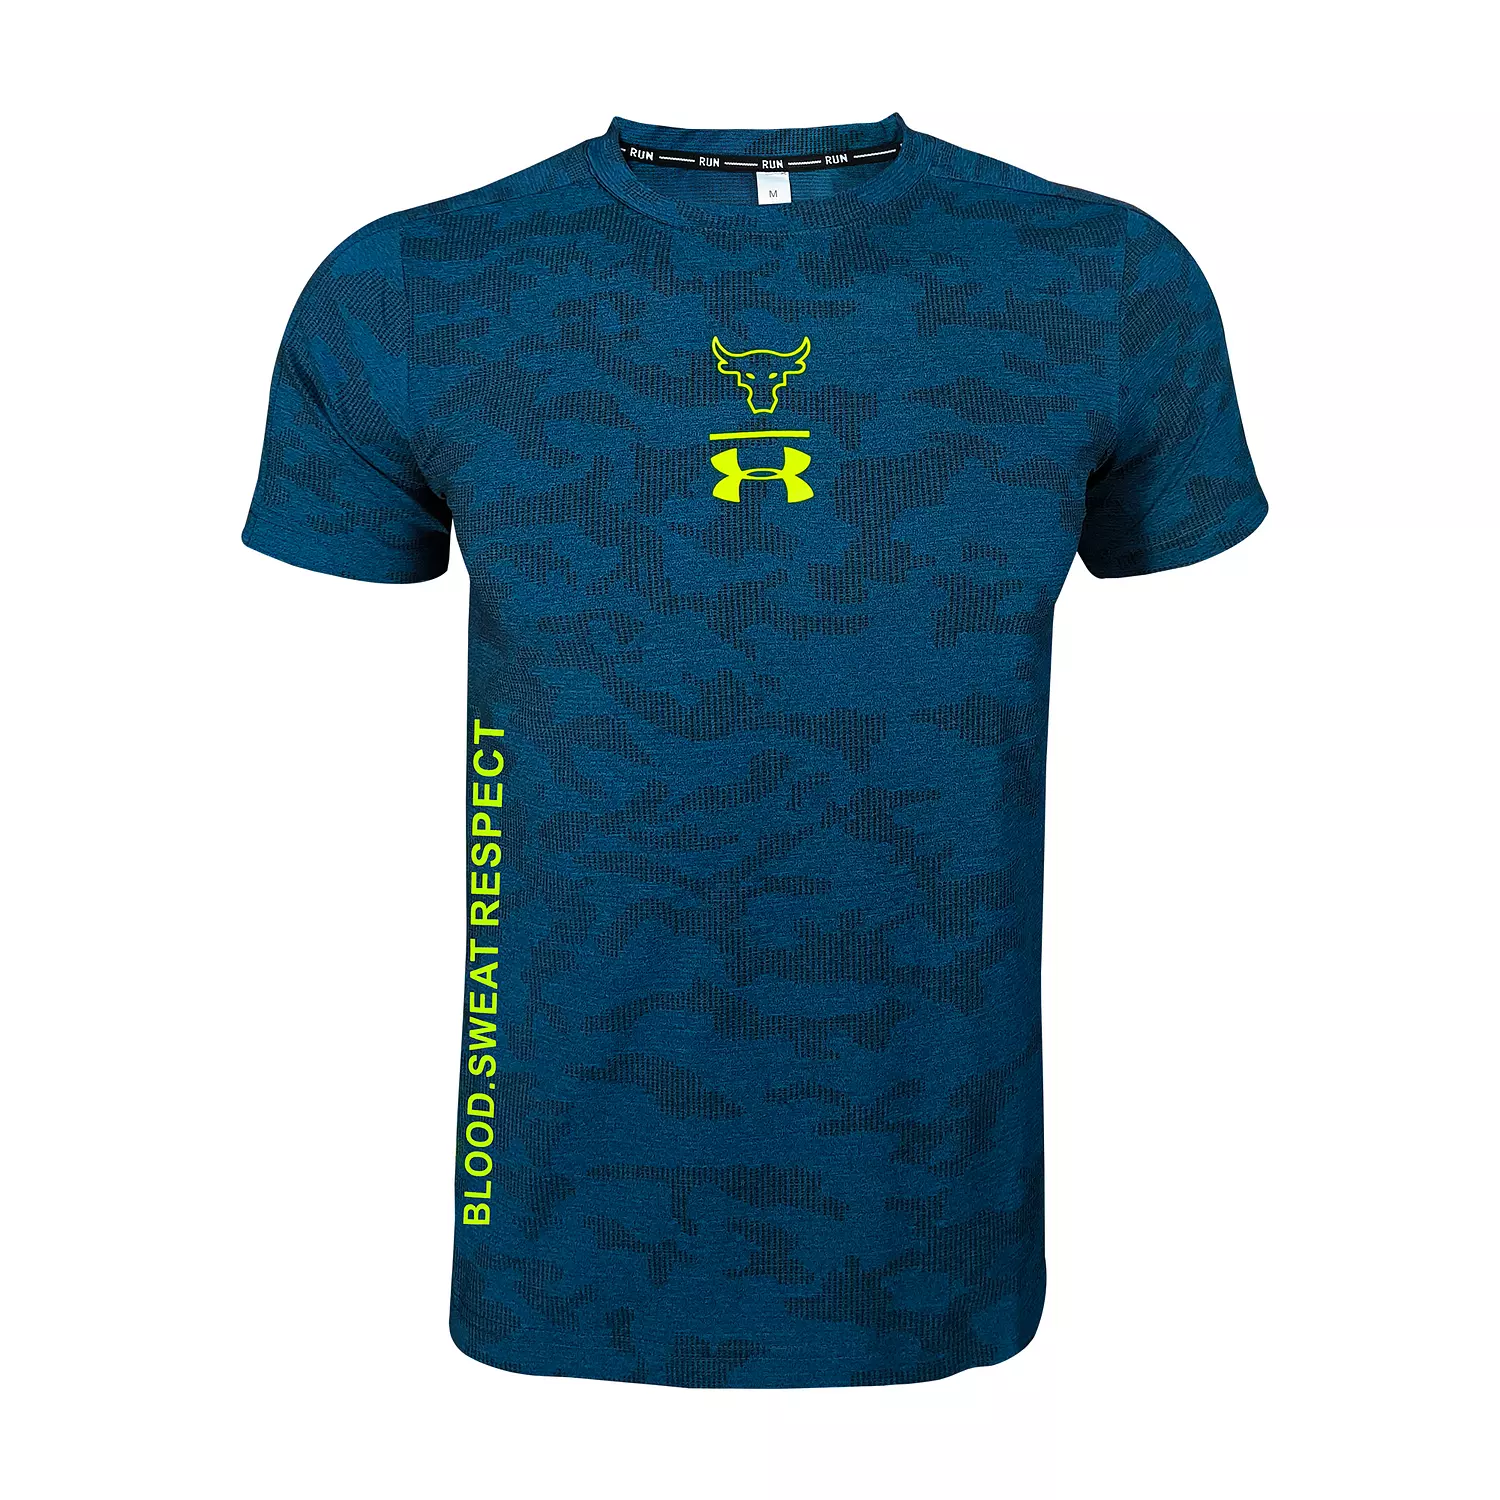 UNDERARMOUR TRAINING T-SHIRT  hover image